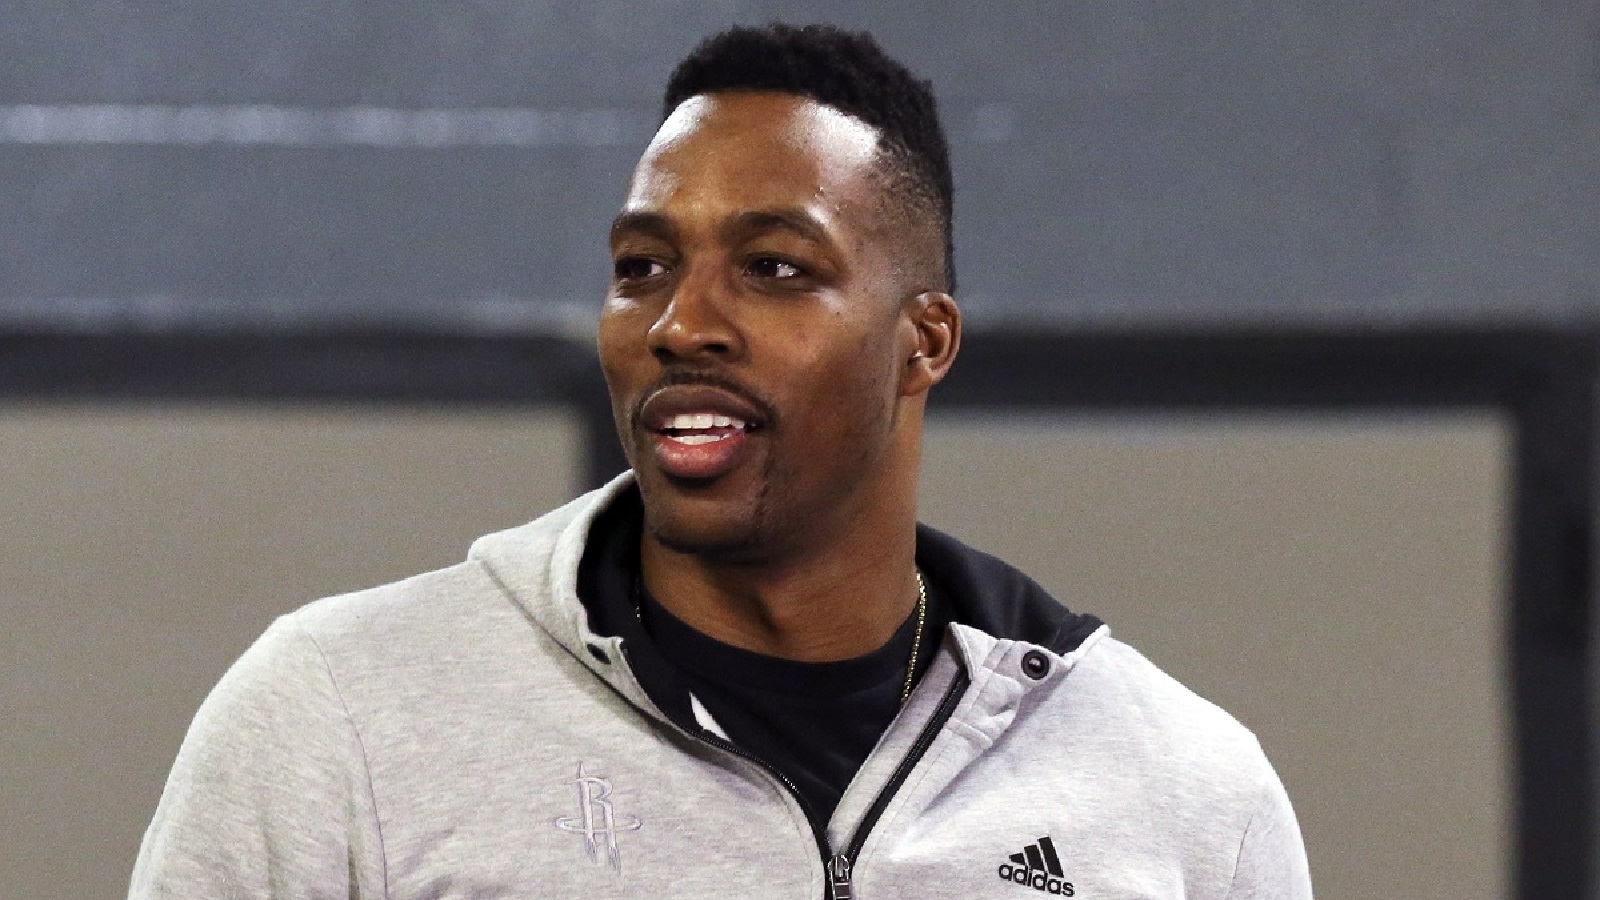 Dwight Howard wants to play for the Kings next season